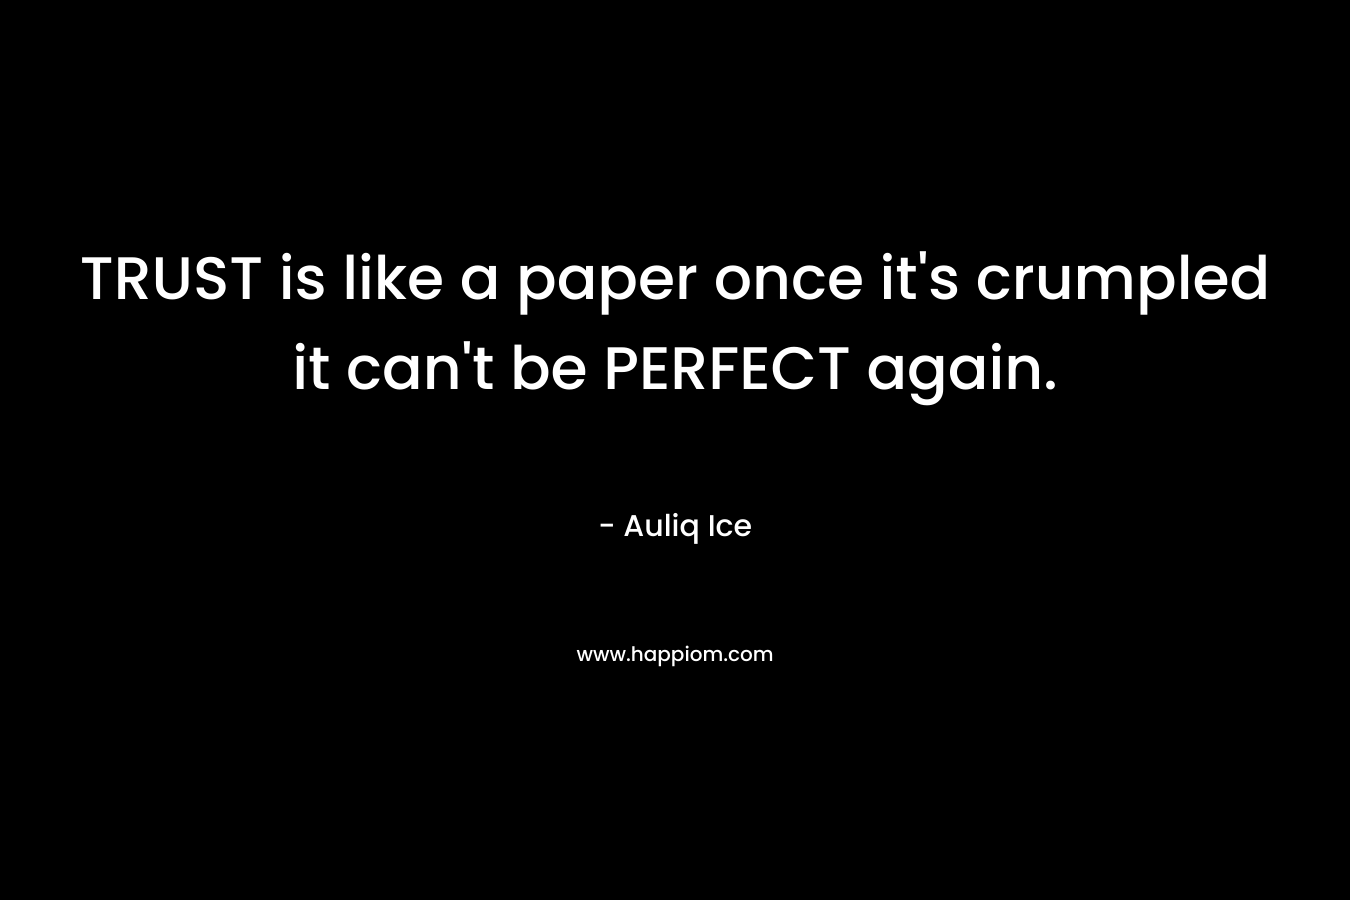 TRUST is like a paper once it's crumpled it can't be PERFECT again.